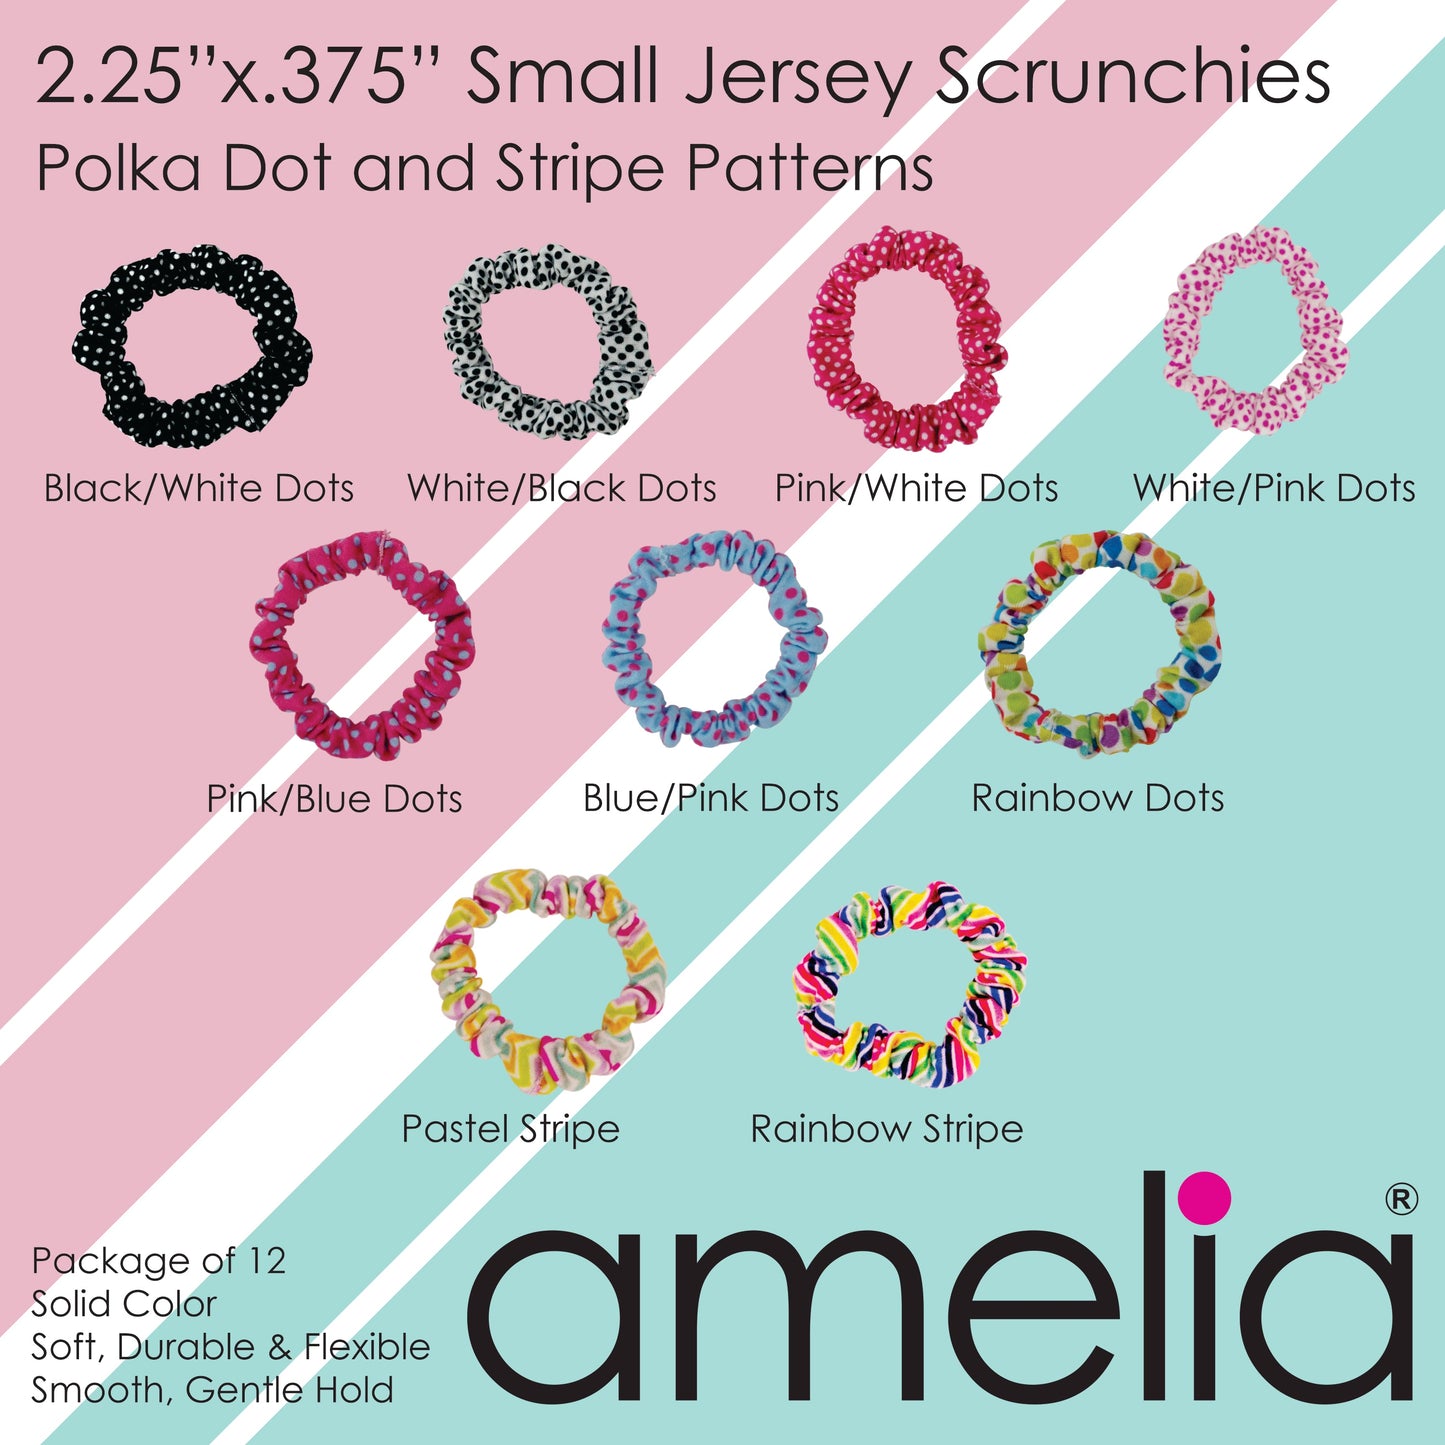 Amelia Beauty, Ocean Colors Jersey Scrunchies, 2.25in Diameter, Gentle on Hair, Strong Hold, No Snag, No Dents or Creases. 12 Pack